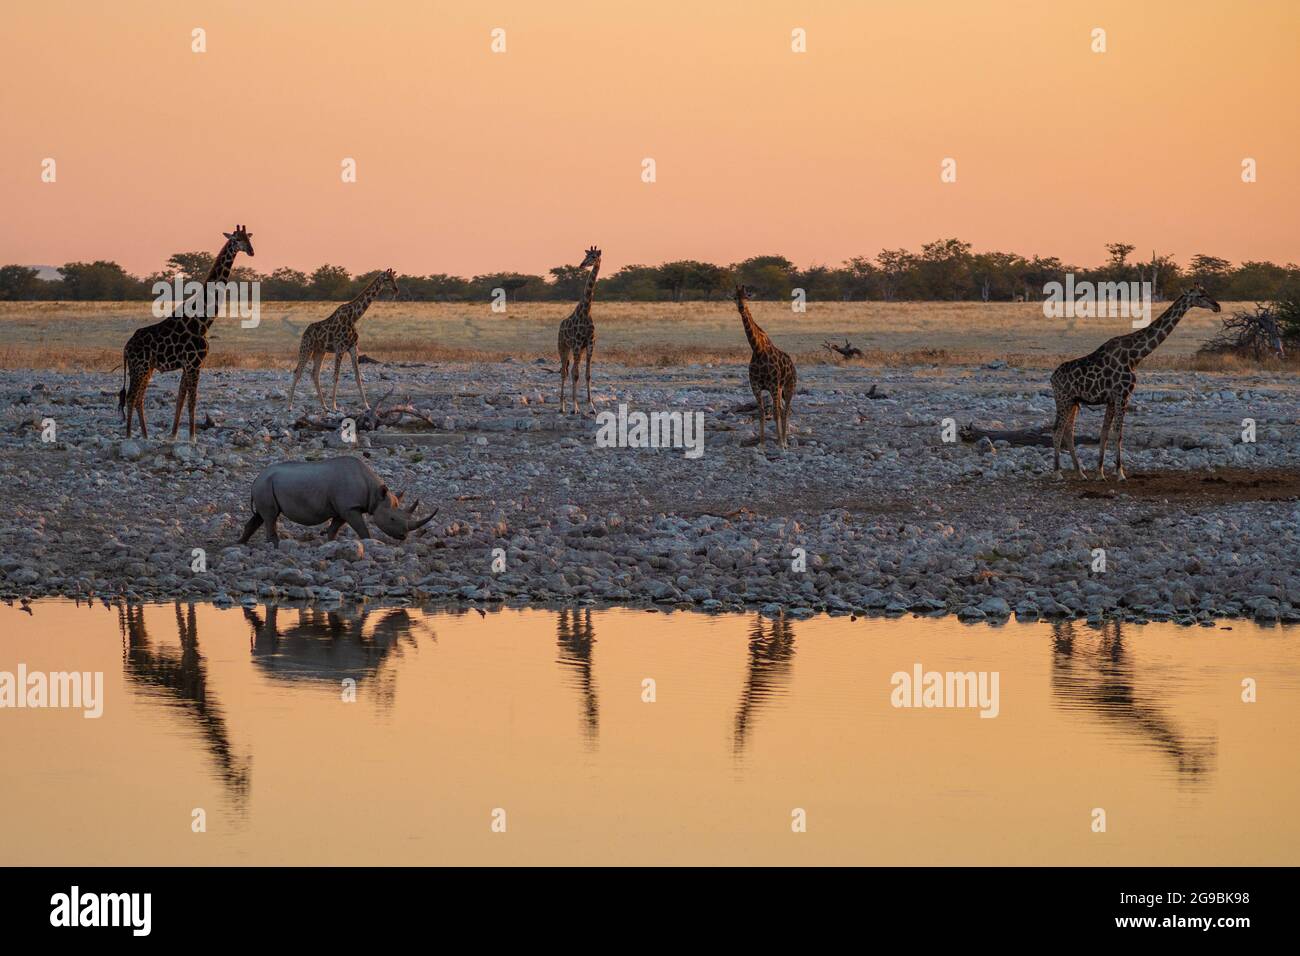 A black rhino and a herd of giraffes congregate around a waterhole at sunset in Etosha National Park, Namibia, Africa. Stock Photo